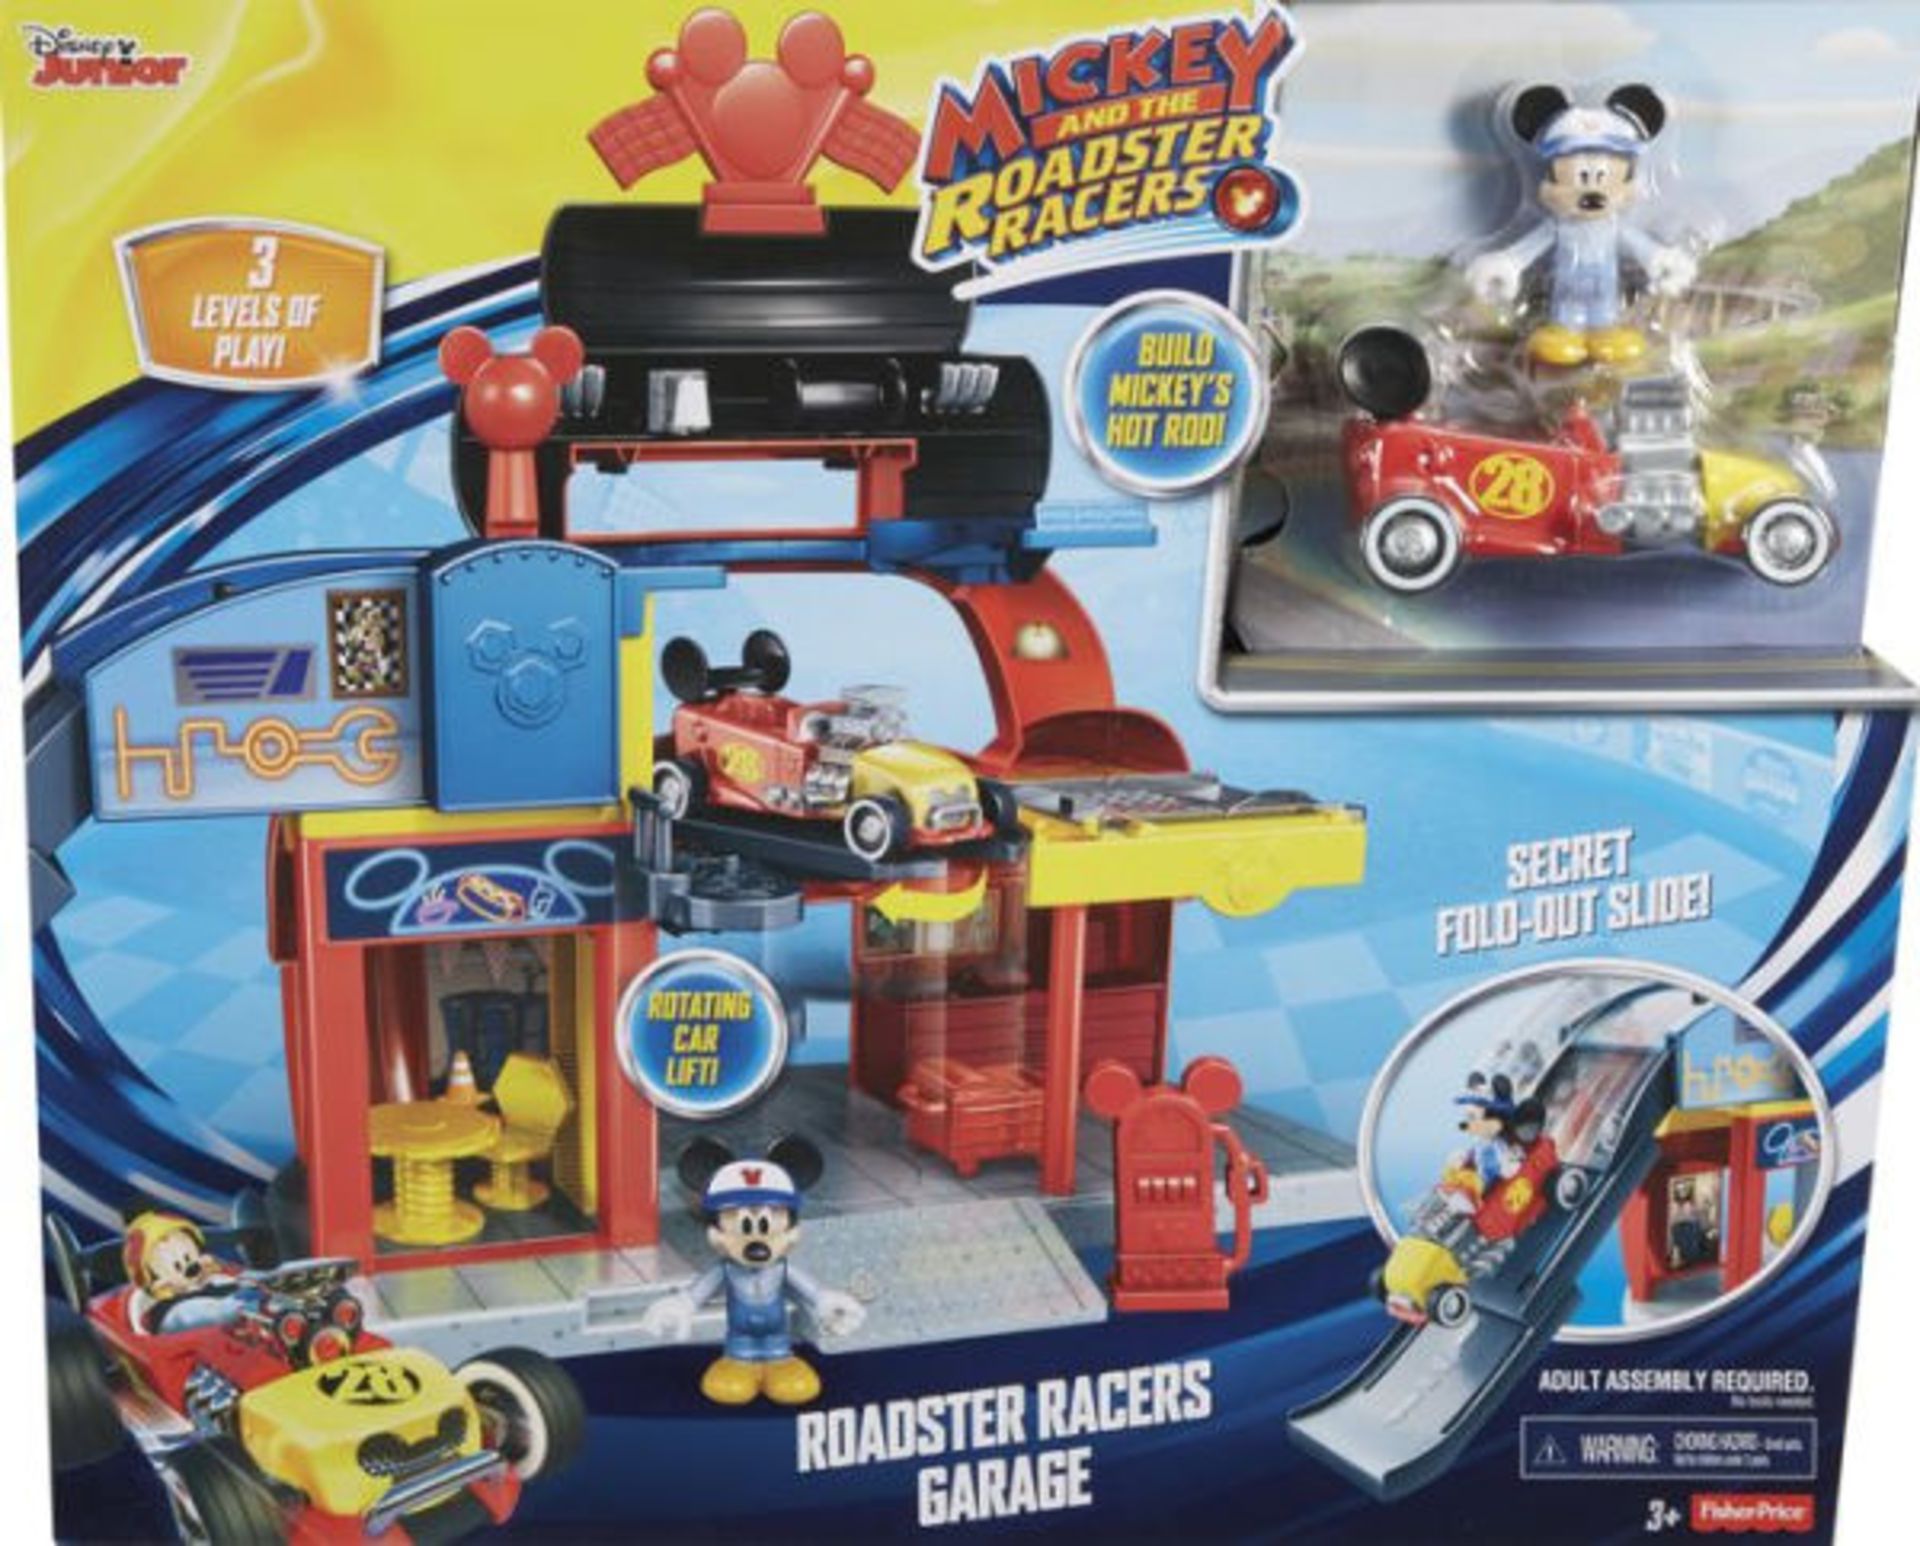 V Brand New Disney Mickey and the Roadster Racers Garage - 3 Levels of Play - Rotating Car Lift -